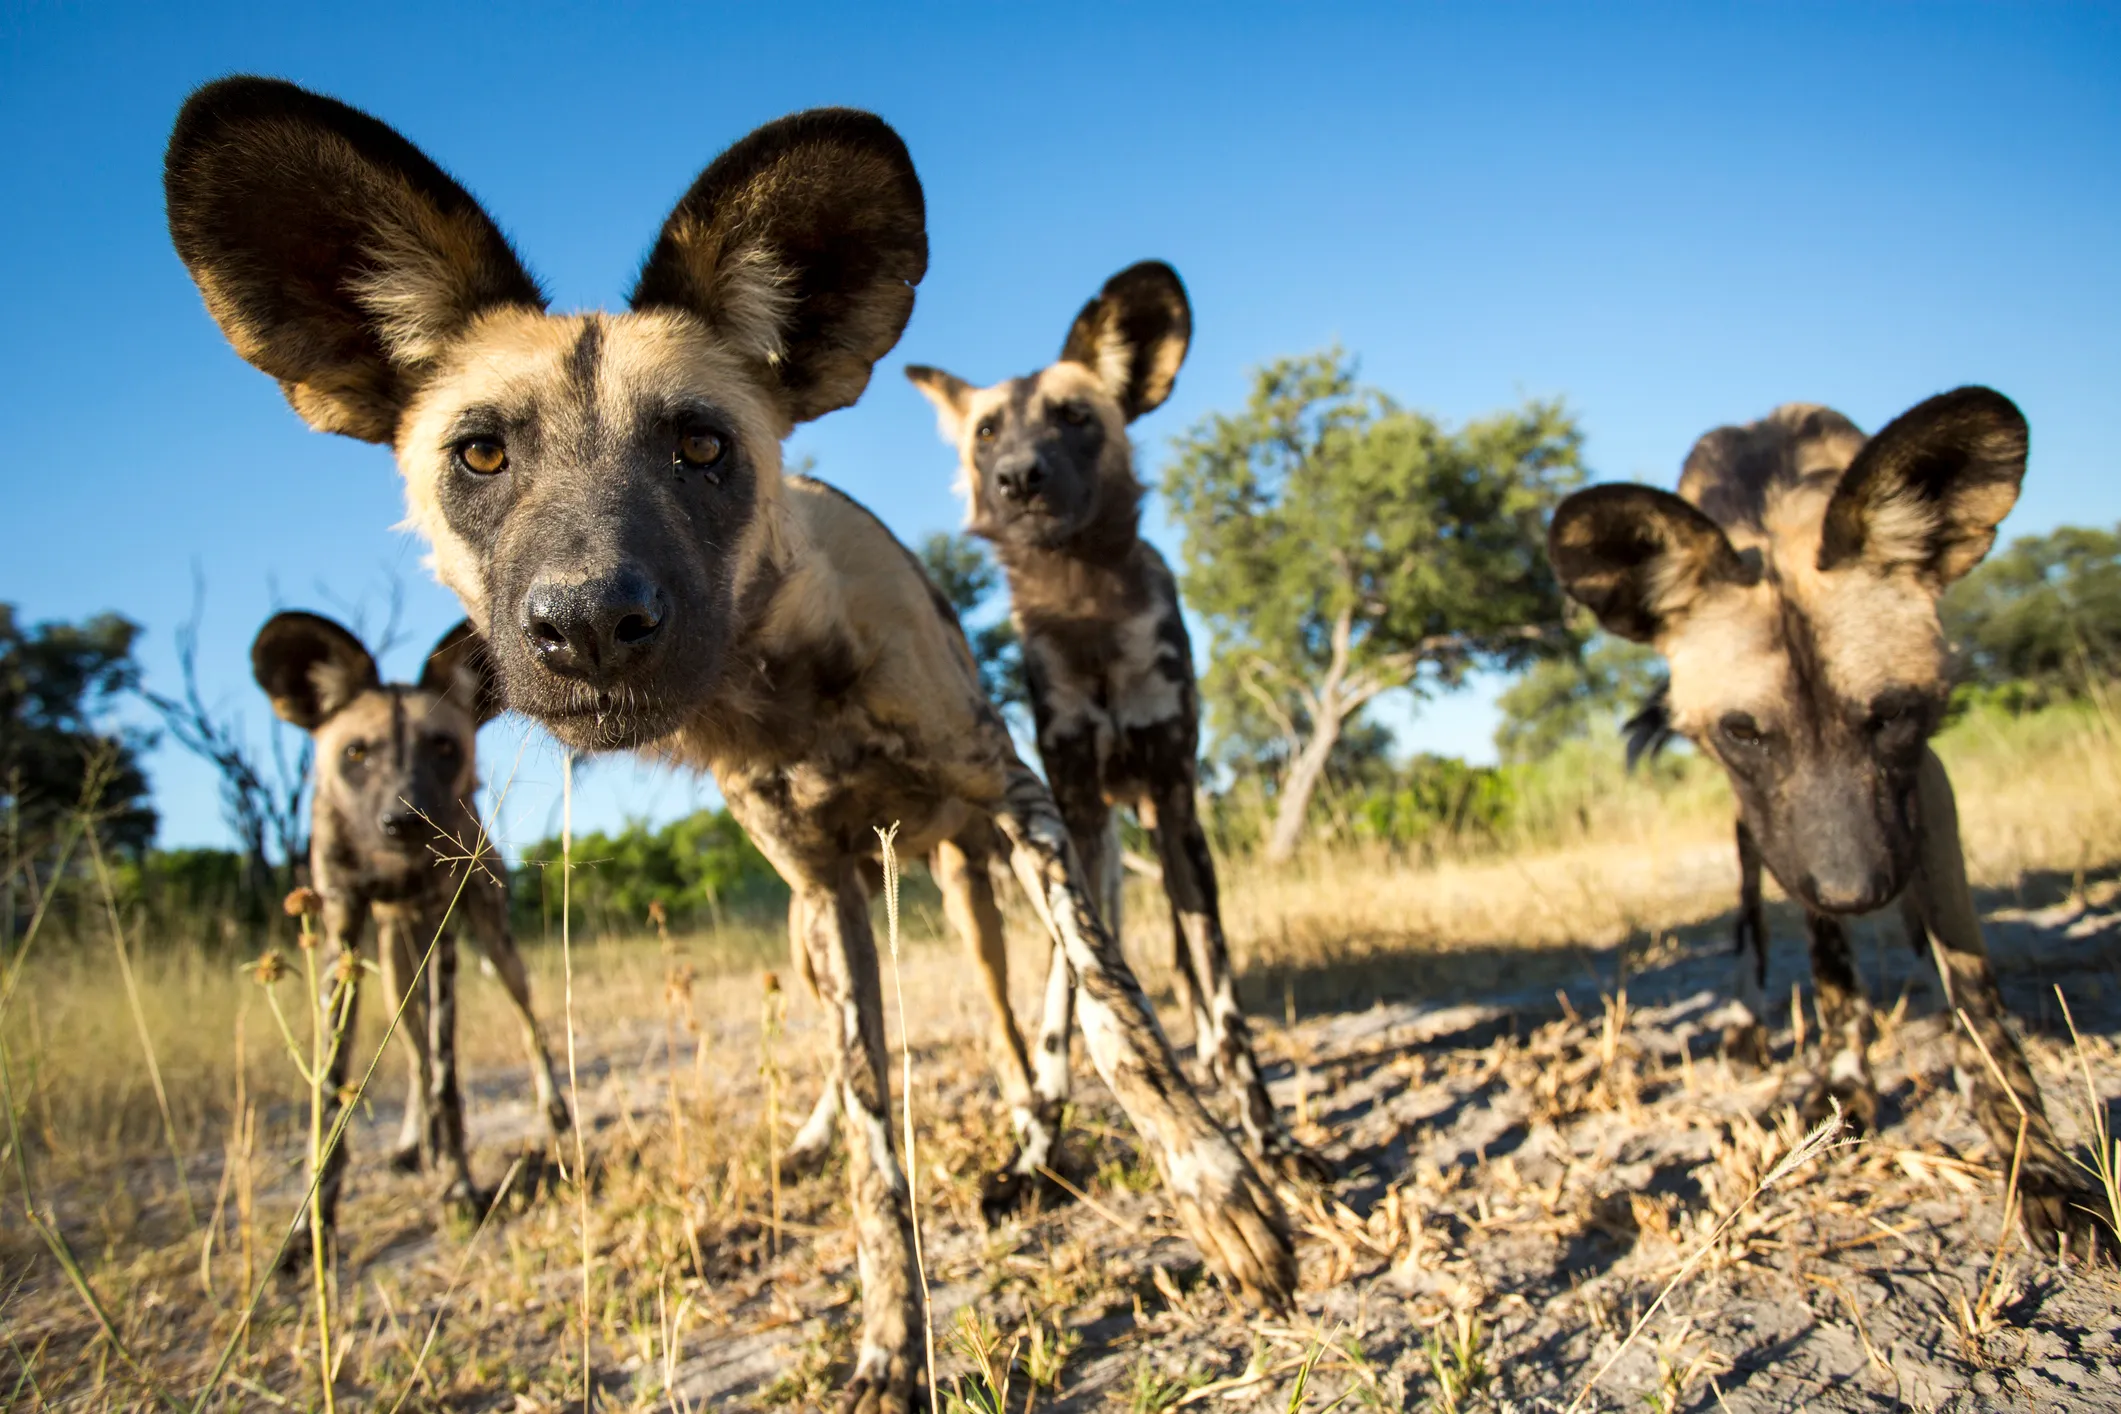 Endangered Wild Dogs Rely on Diverse Habitat to Survive Around